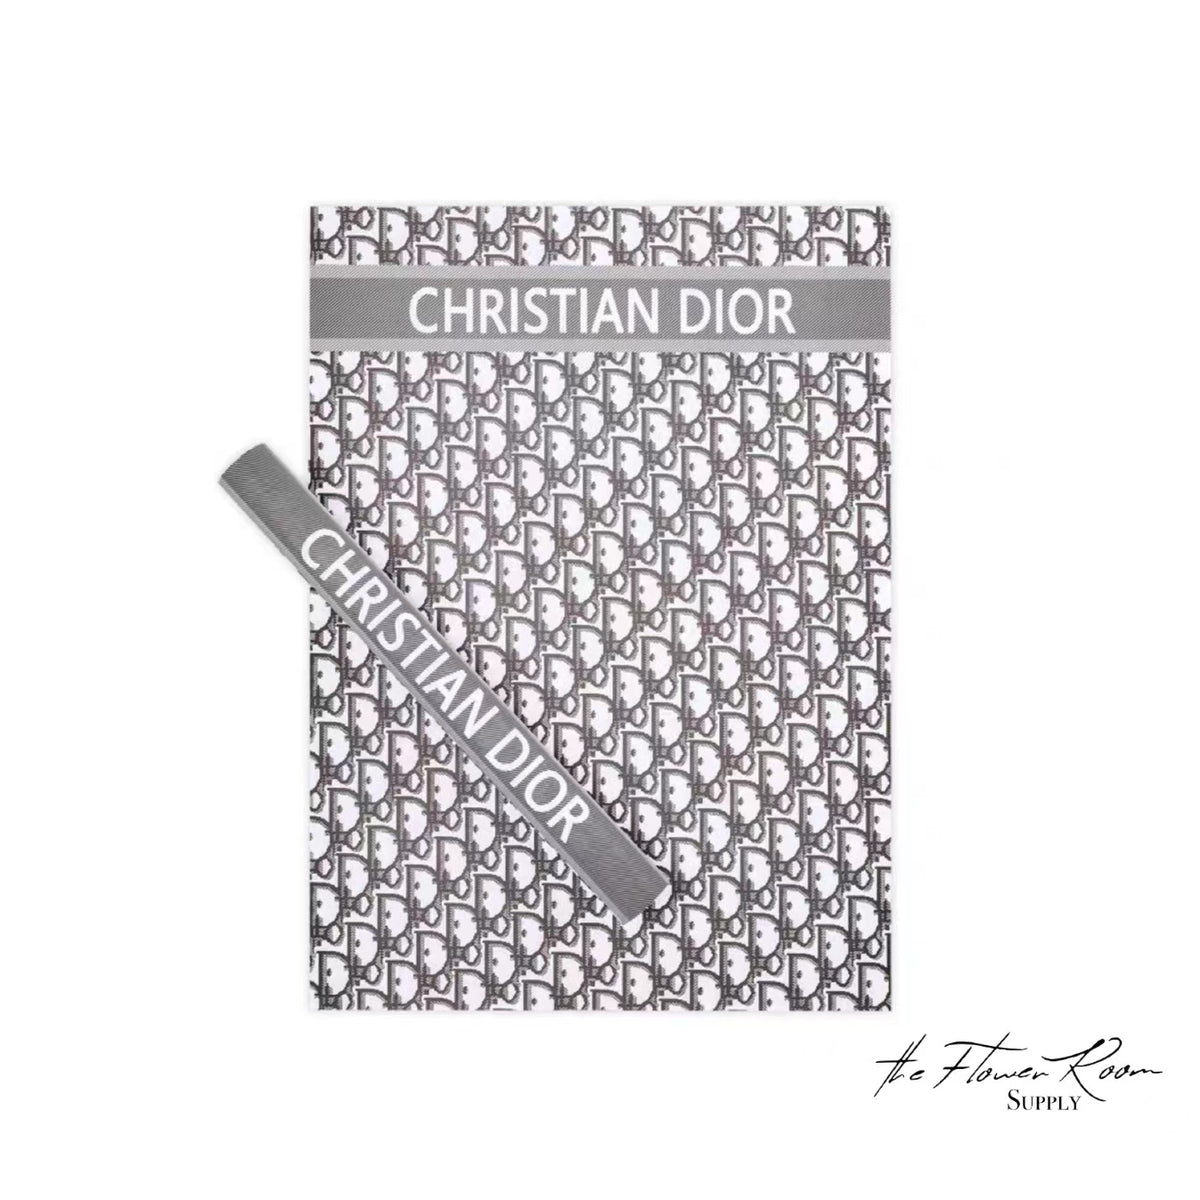 where to purchase dior flower wrapping paper｜TikTok Search